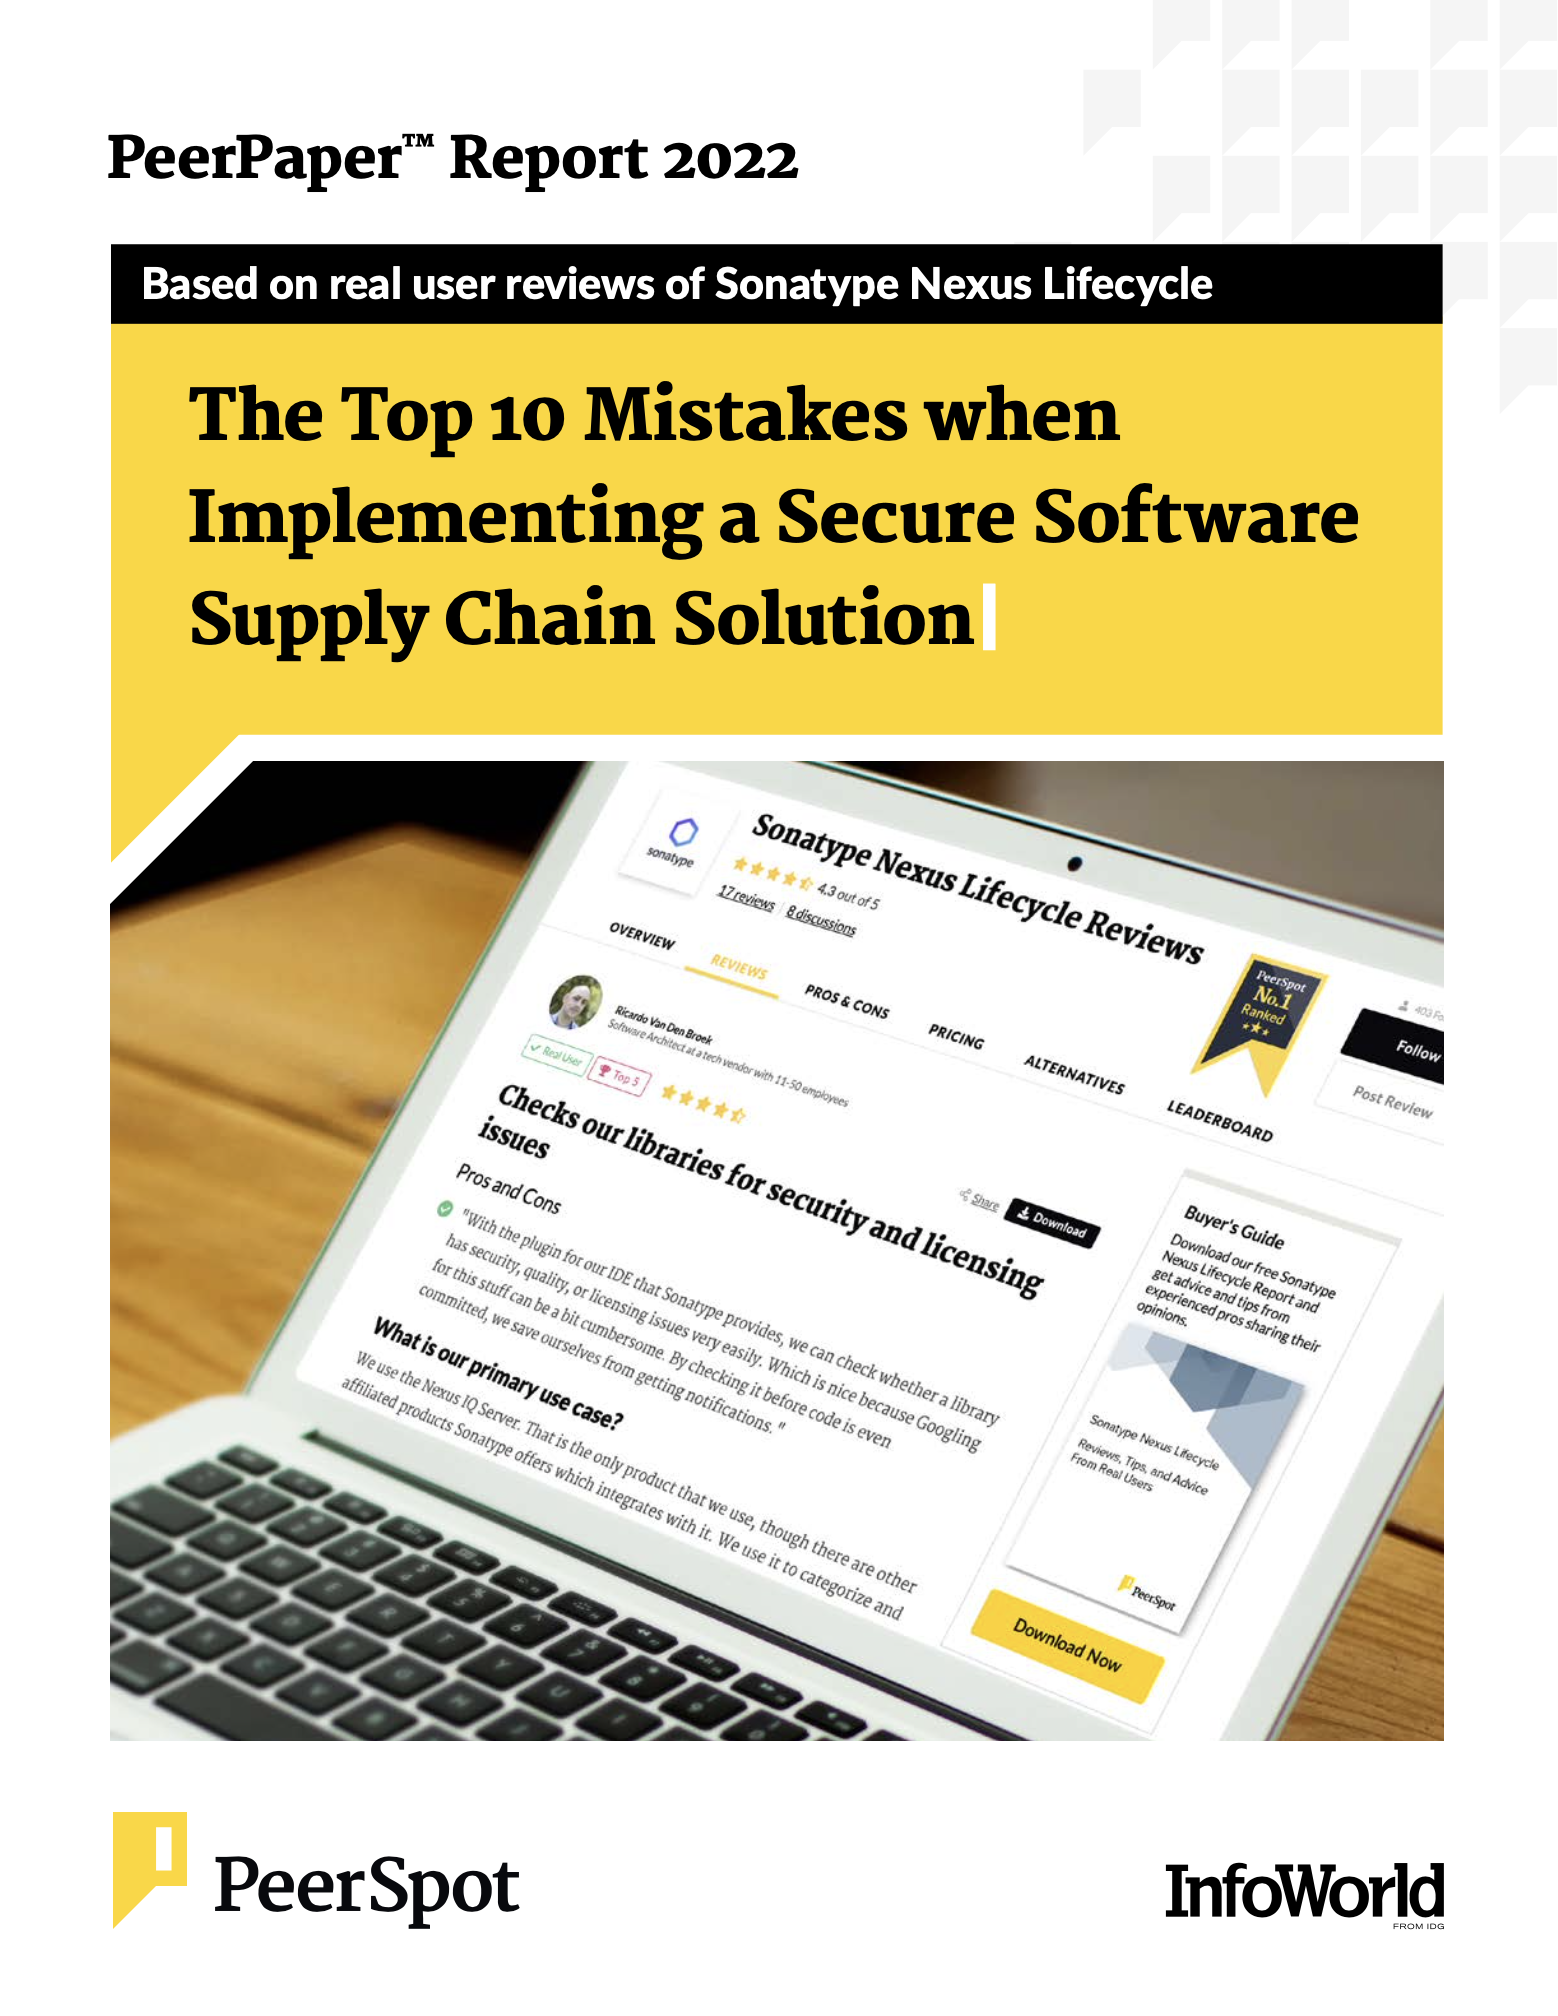 The Top 10 Mistakes when Implementing a Secure Software Supply Chain Solution